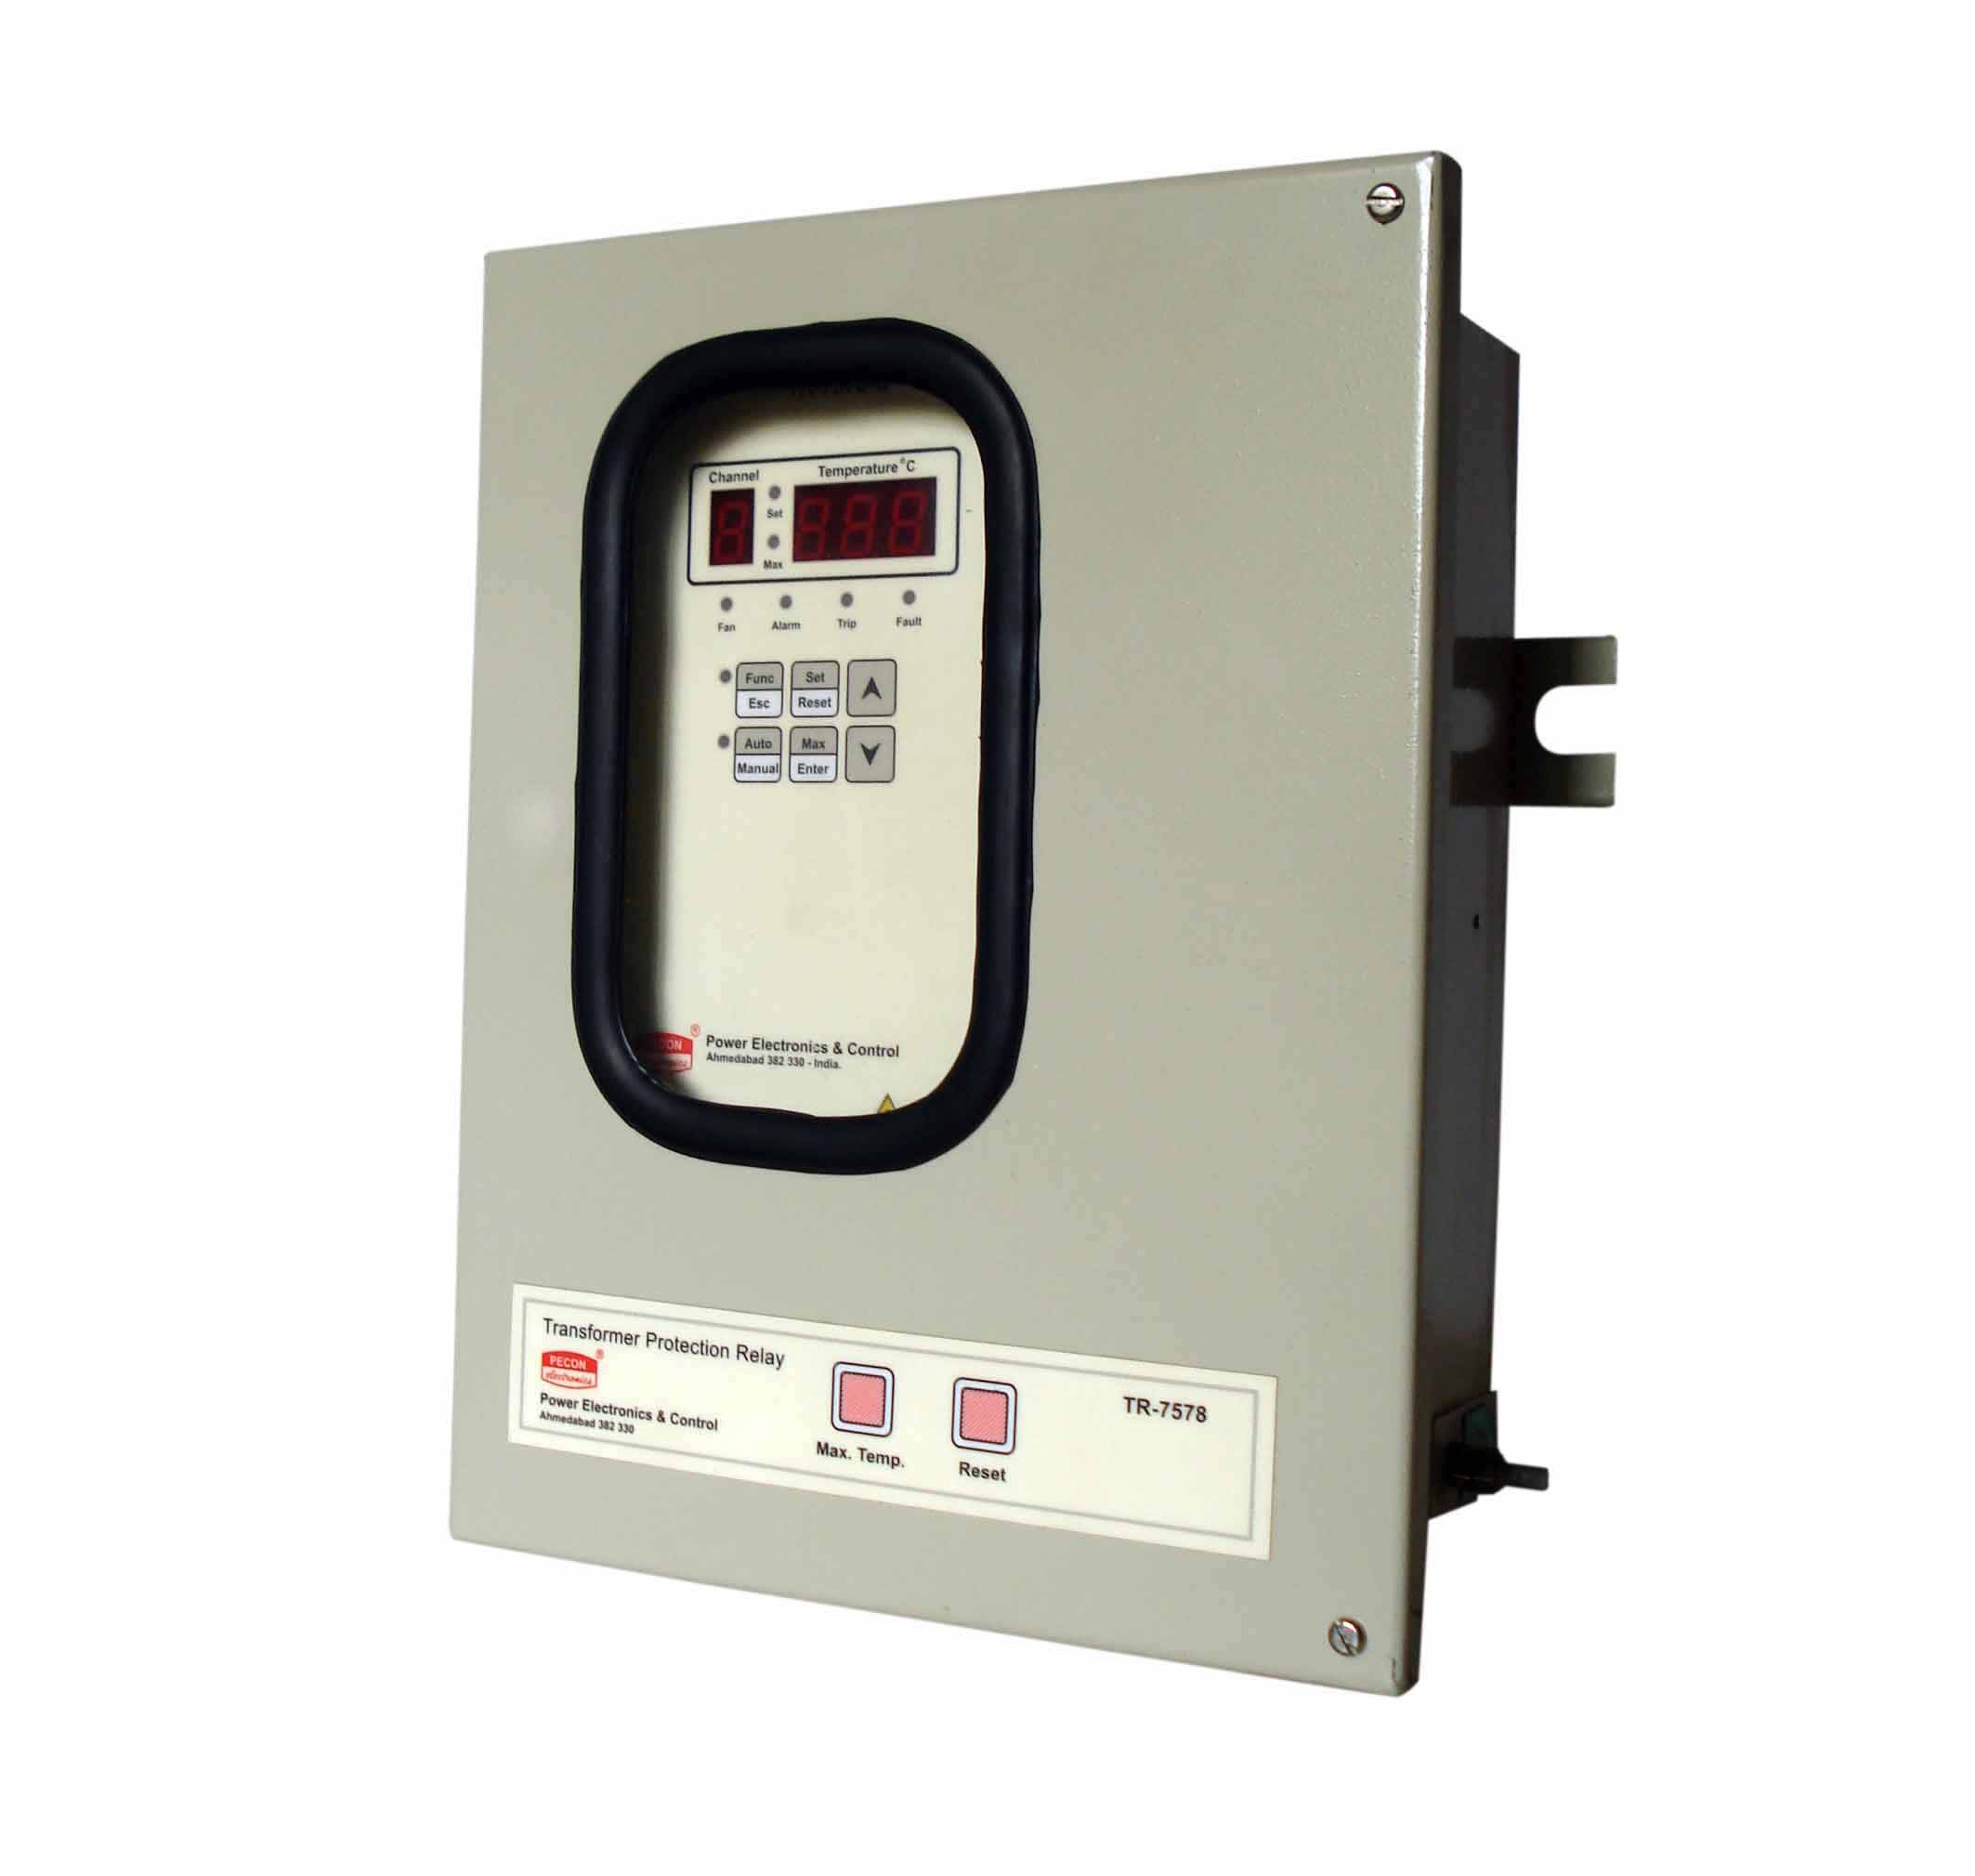 TR 7578 Eight channel temperature scanner with 4 20 mA remote output Transformer Protection Relay